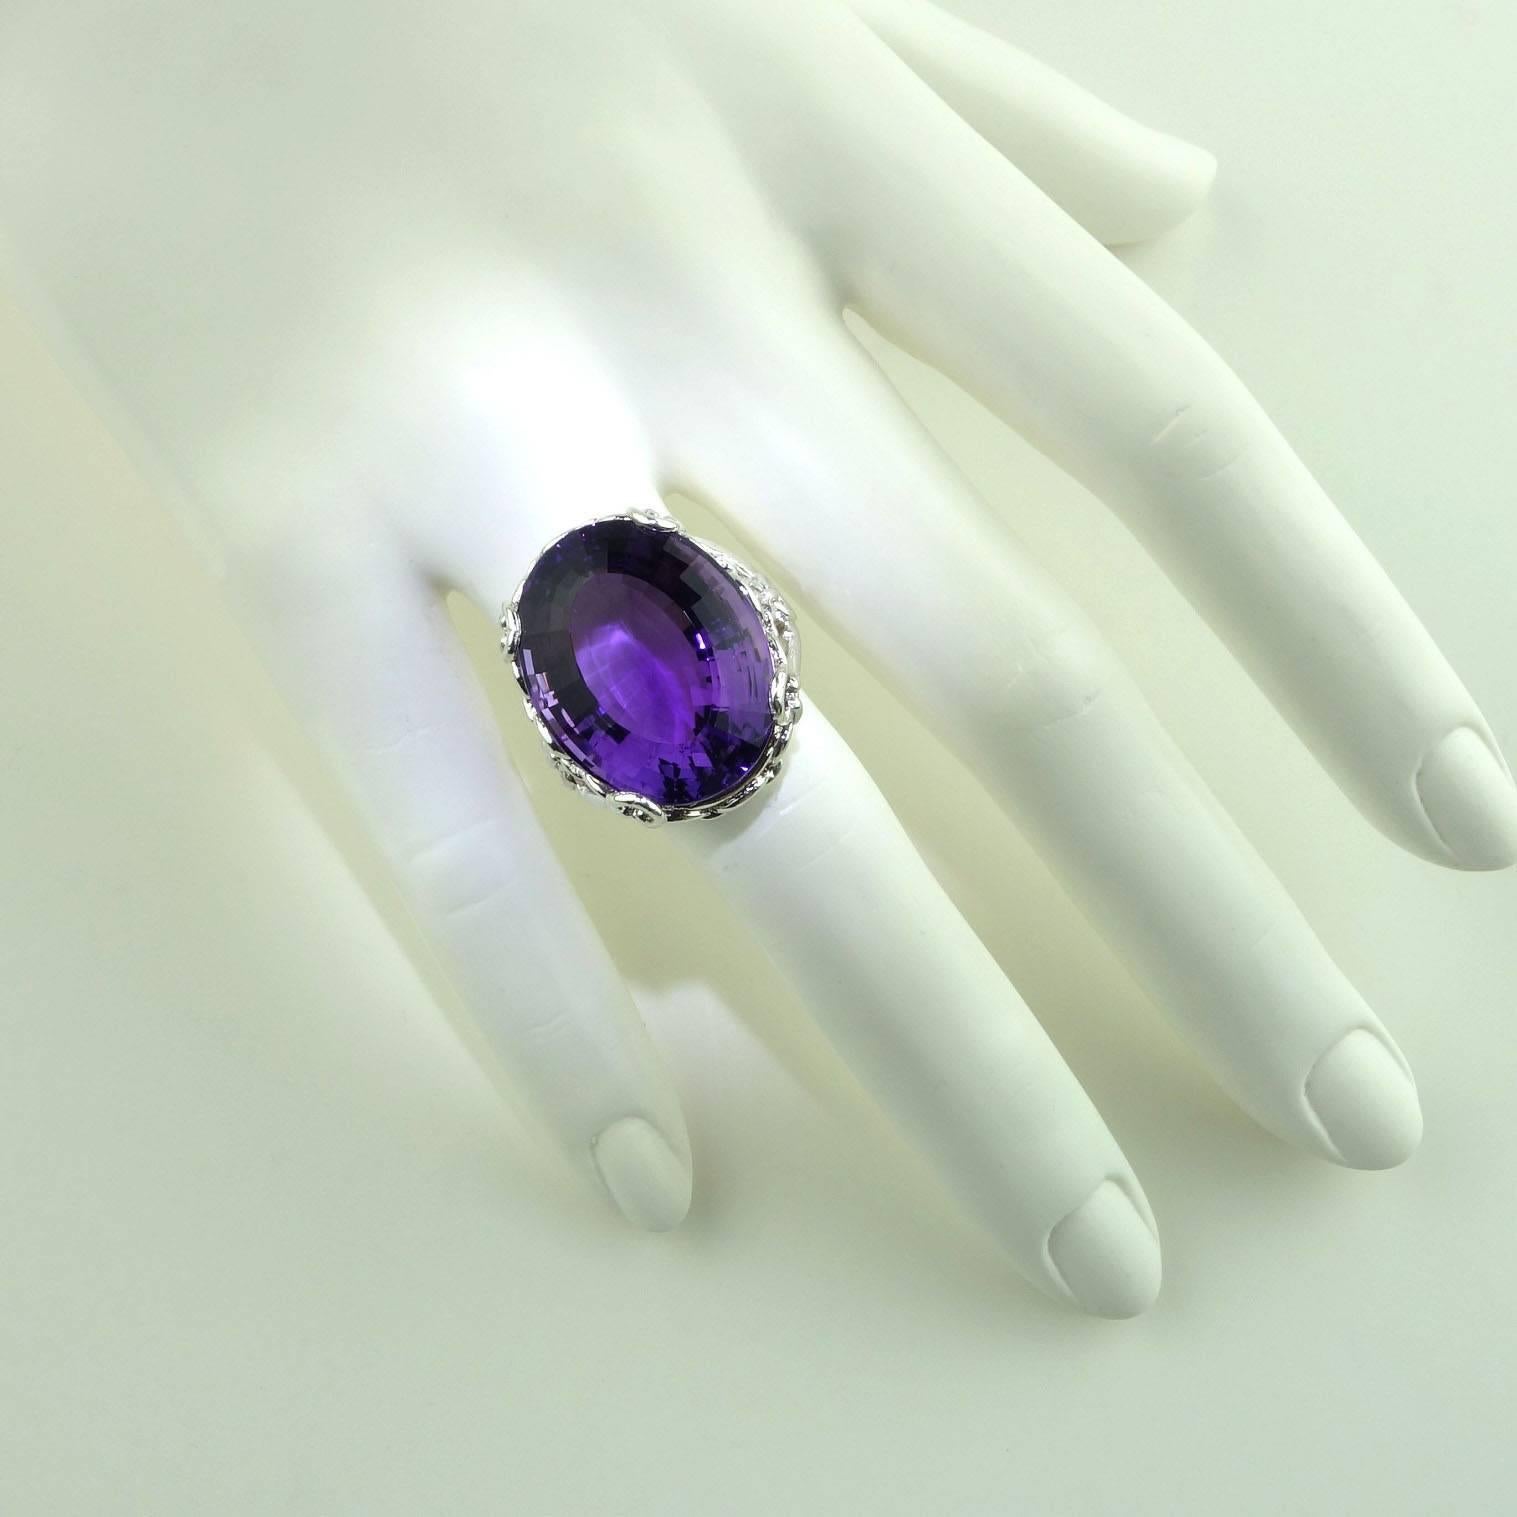 Flashing, huge Brazilian Amethyst set in a lovely open loop design in rhodium over Sterling Silver ring. This Amethyst came from a special parcel from our favorite suppier in the mountains outside of Rio de Janeiro, it is incredibly bright with both